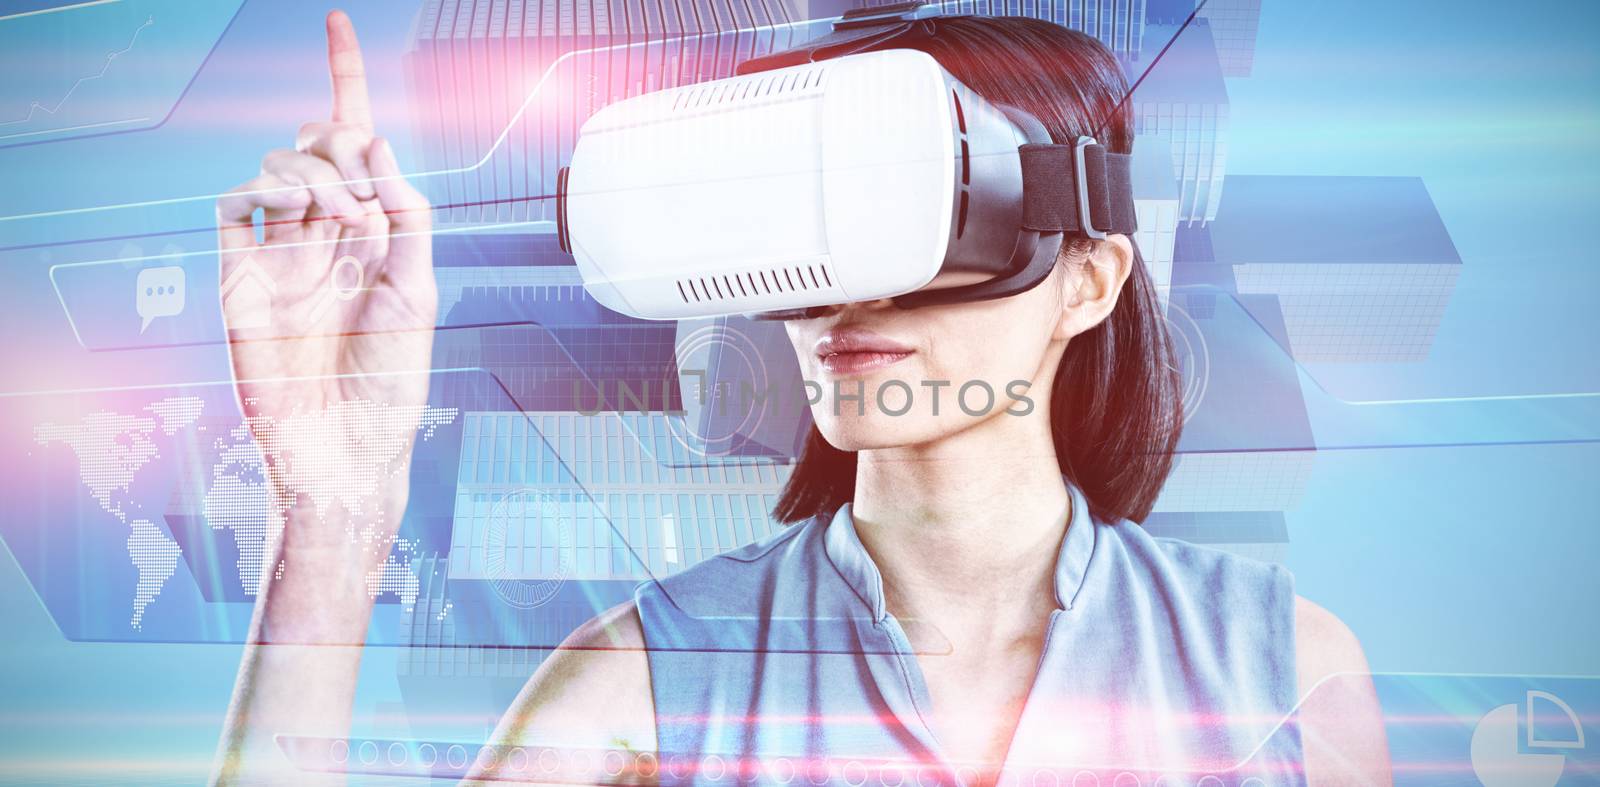 Female executive gesturing while using virtual reality headset against futuristic technology interface